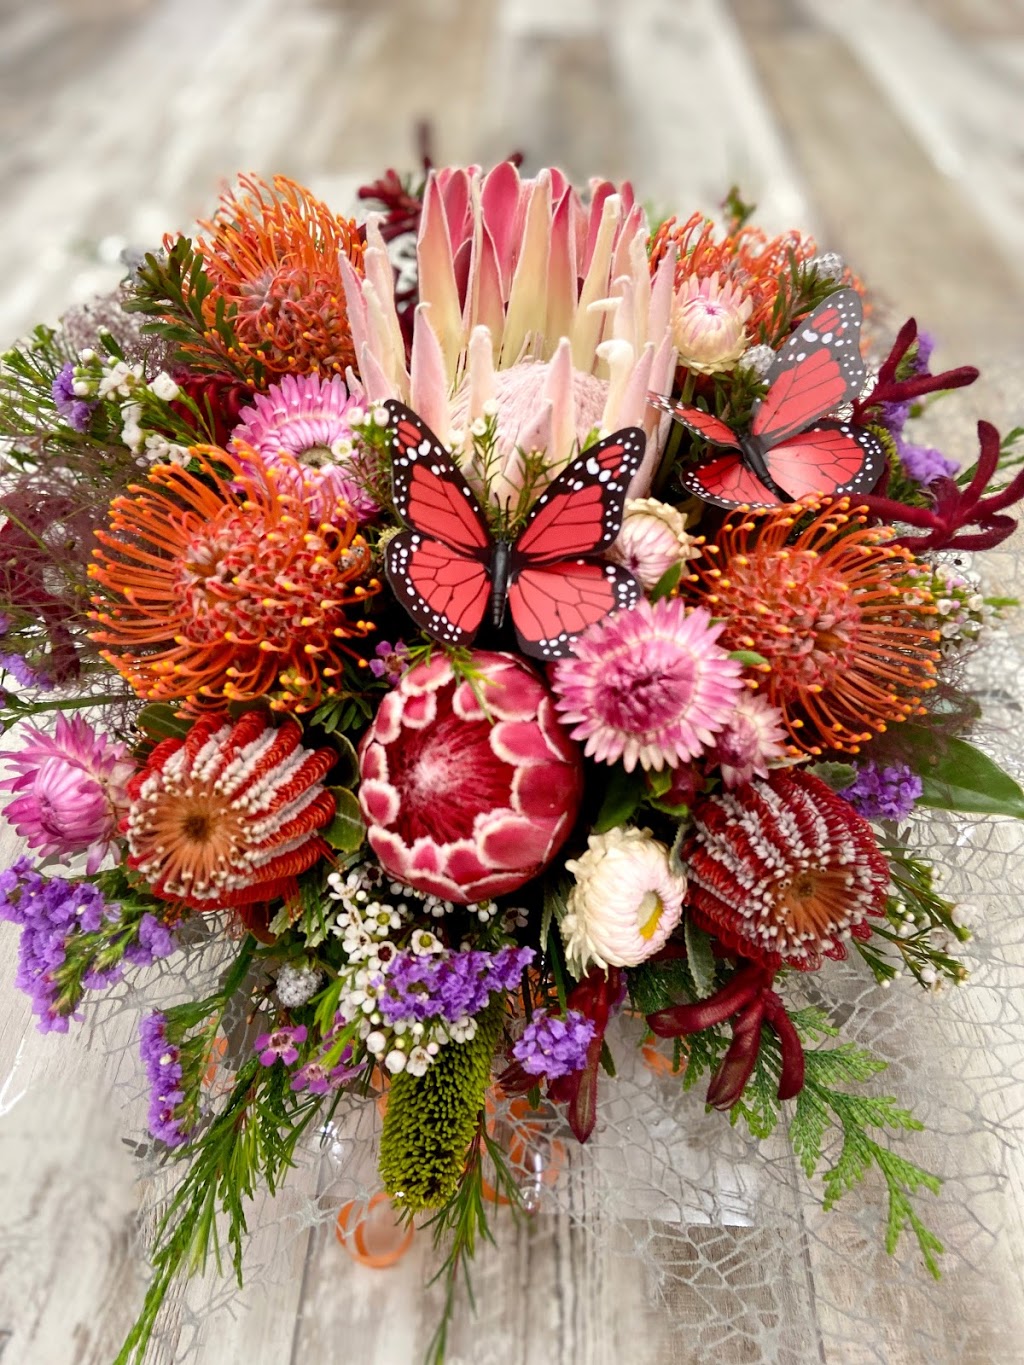 Bewitched Flowers & Gifts | florist | Shop 4/3 Carleton St, Kambah ACT 2902, Australia | 0261818677 OR +61 2 6181 8677